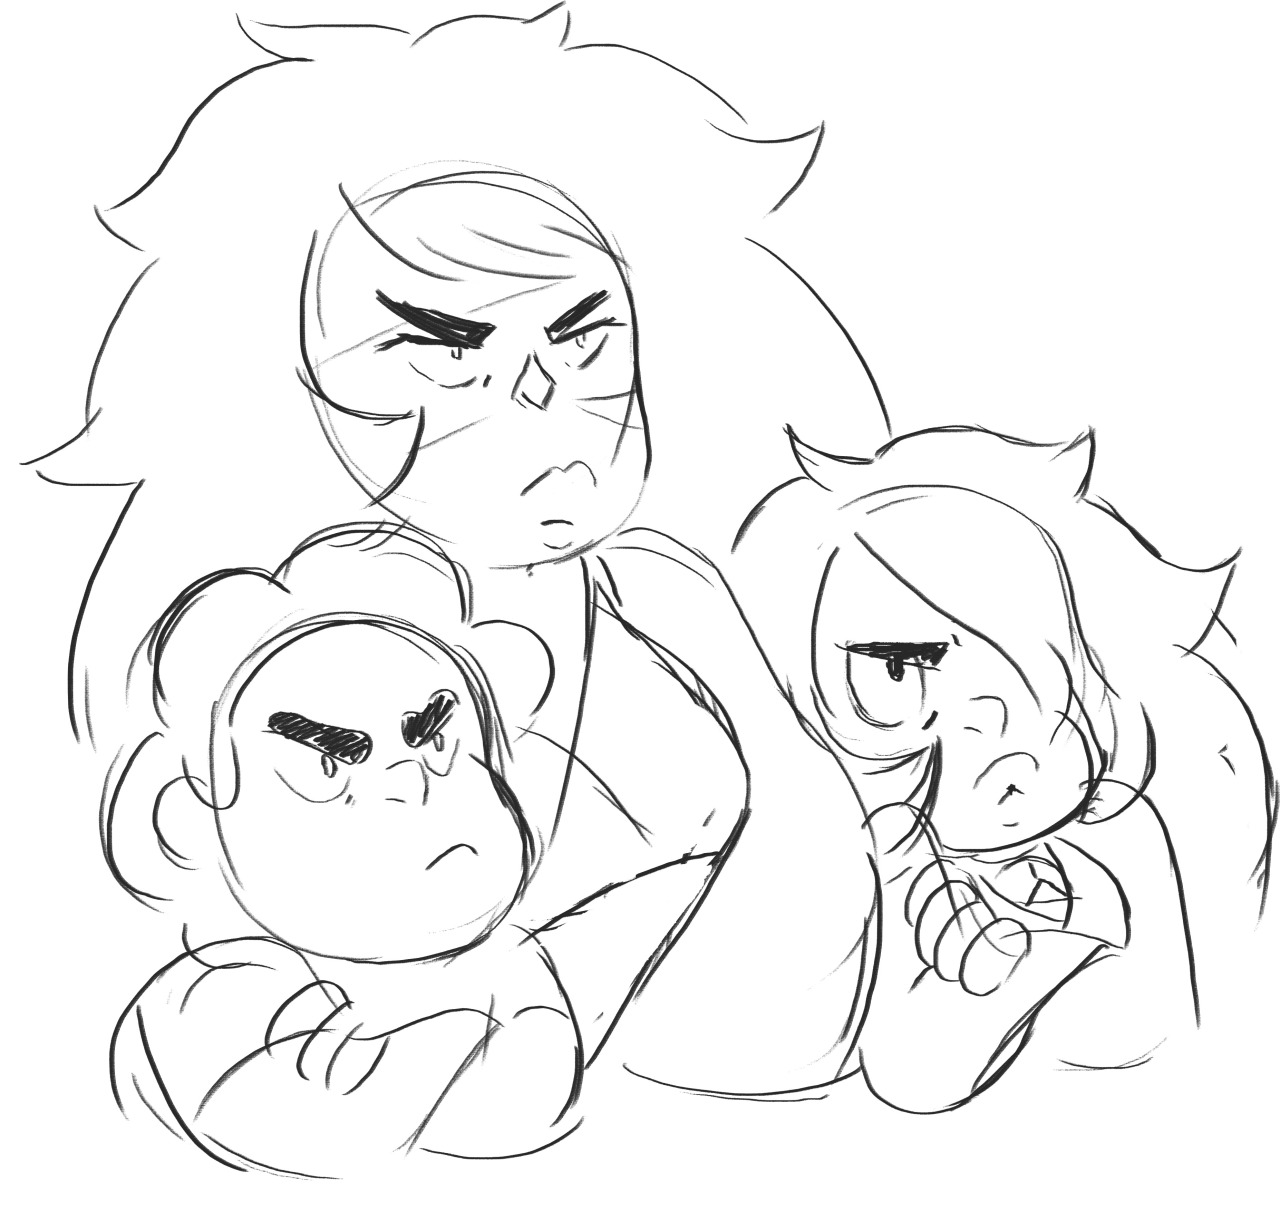 sparkbat:  I really enjoy drawing Jasper, a LOT. Here’s my sketches for warming